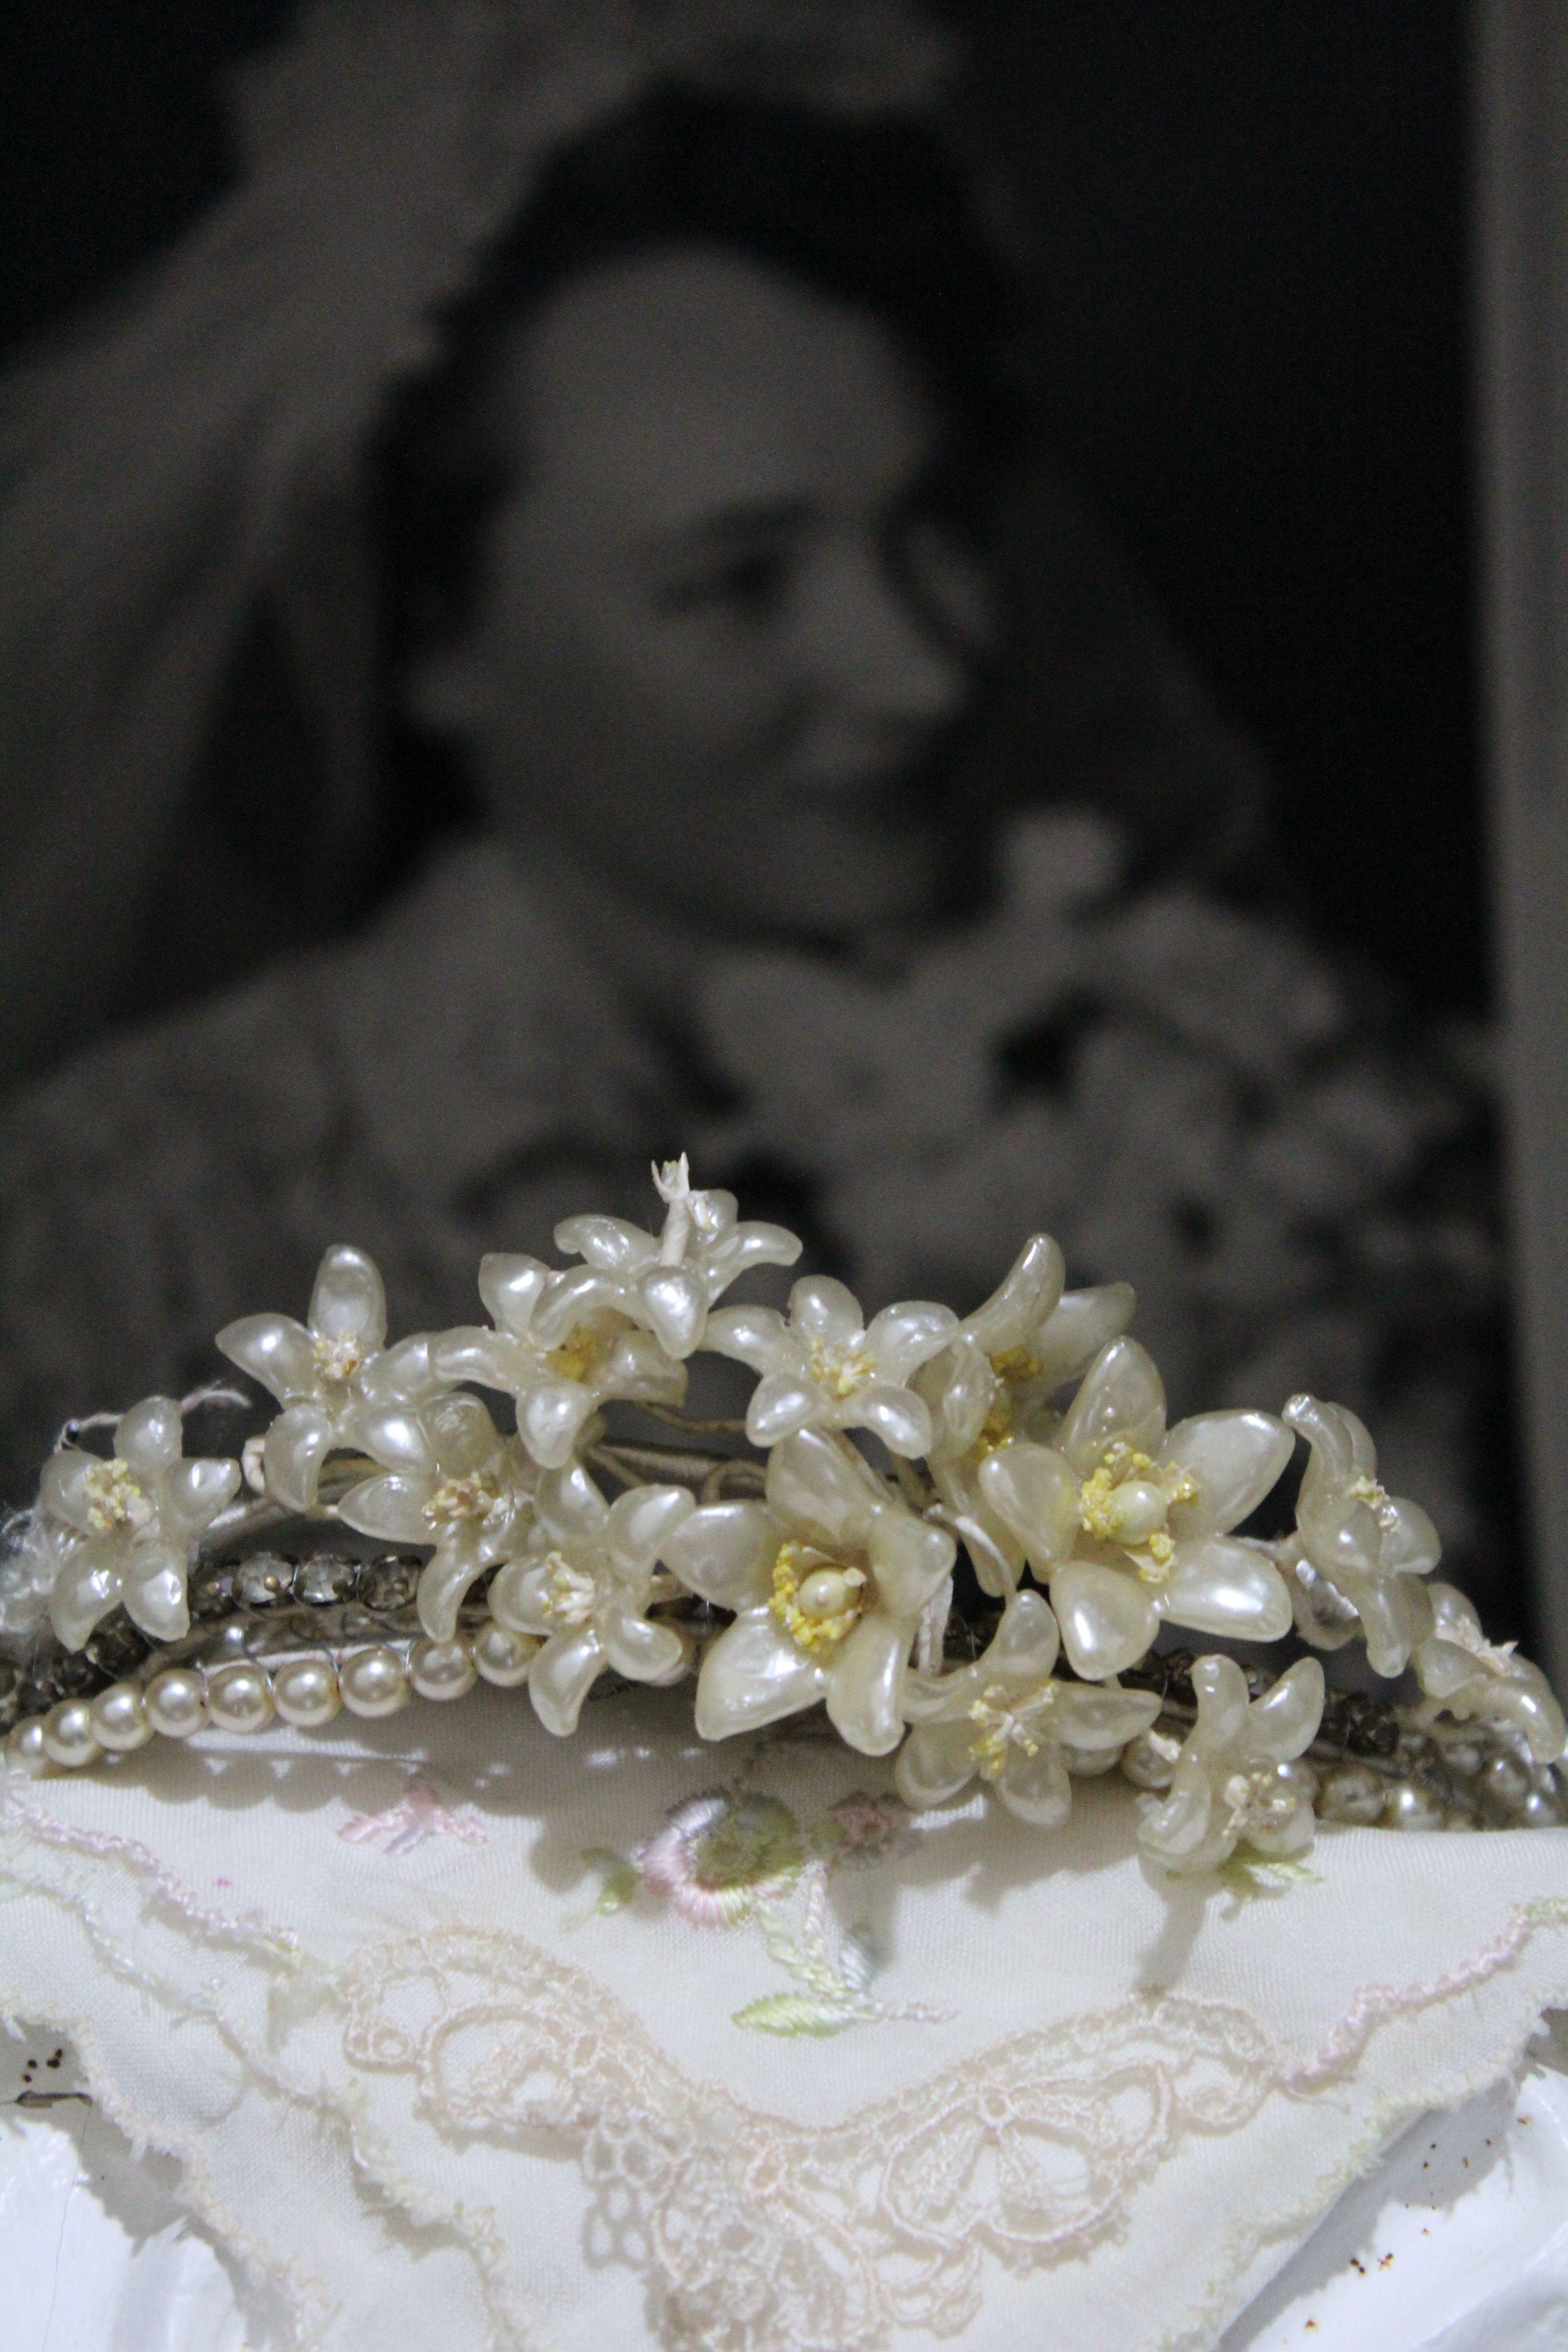 Lizzia’s tiara from her wedding day; her wedding handkerchief in the foreground. See Lizzia’s picture in the background. Credit: Malinda van Zyl.